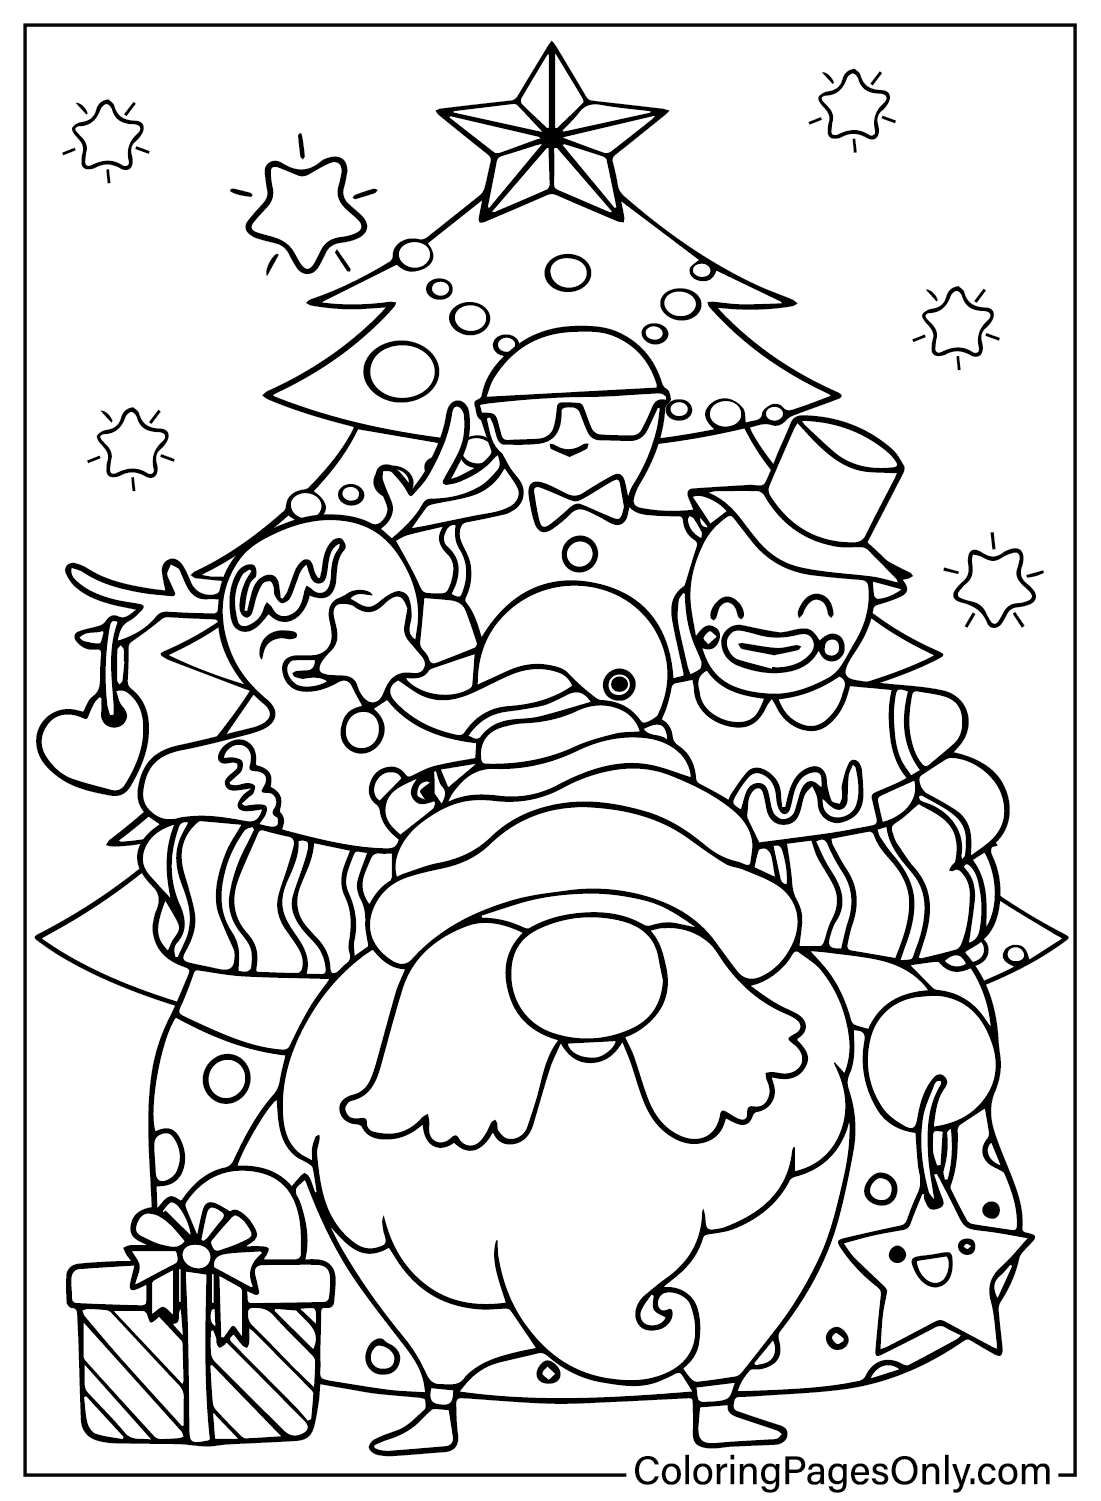 Coloring Page of Santa Claus from Christmas 2024